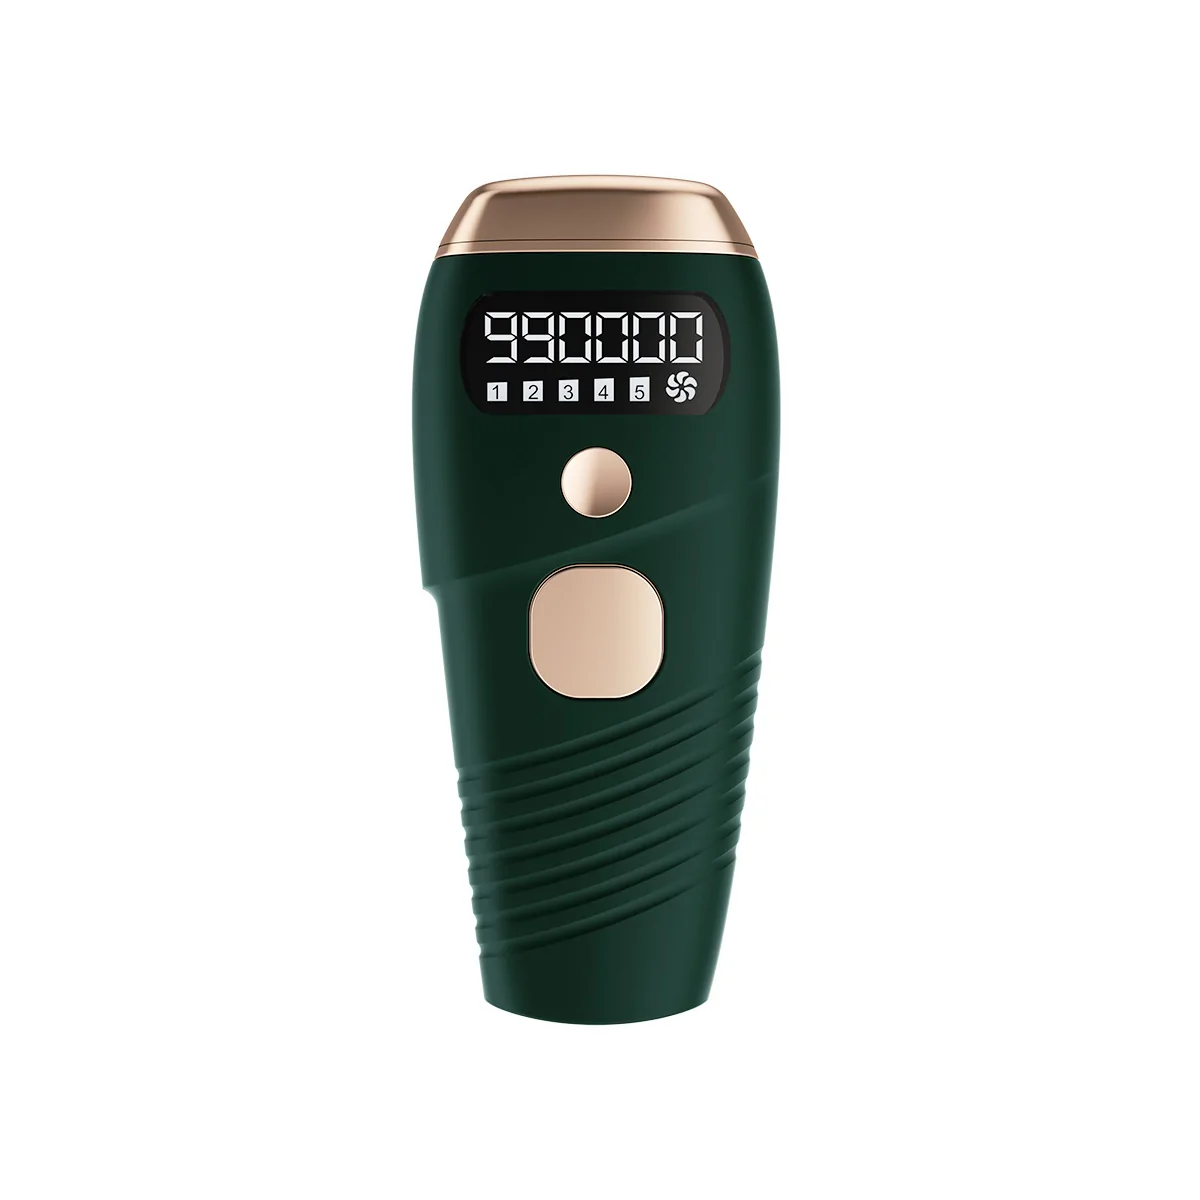 Find Bakeey 990 000 Flashes Laser IPL Permanent Hair Machine Removal Remover Women Bikini Face Body for Sale on Gipsybee.com